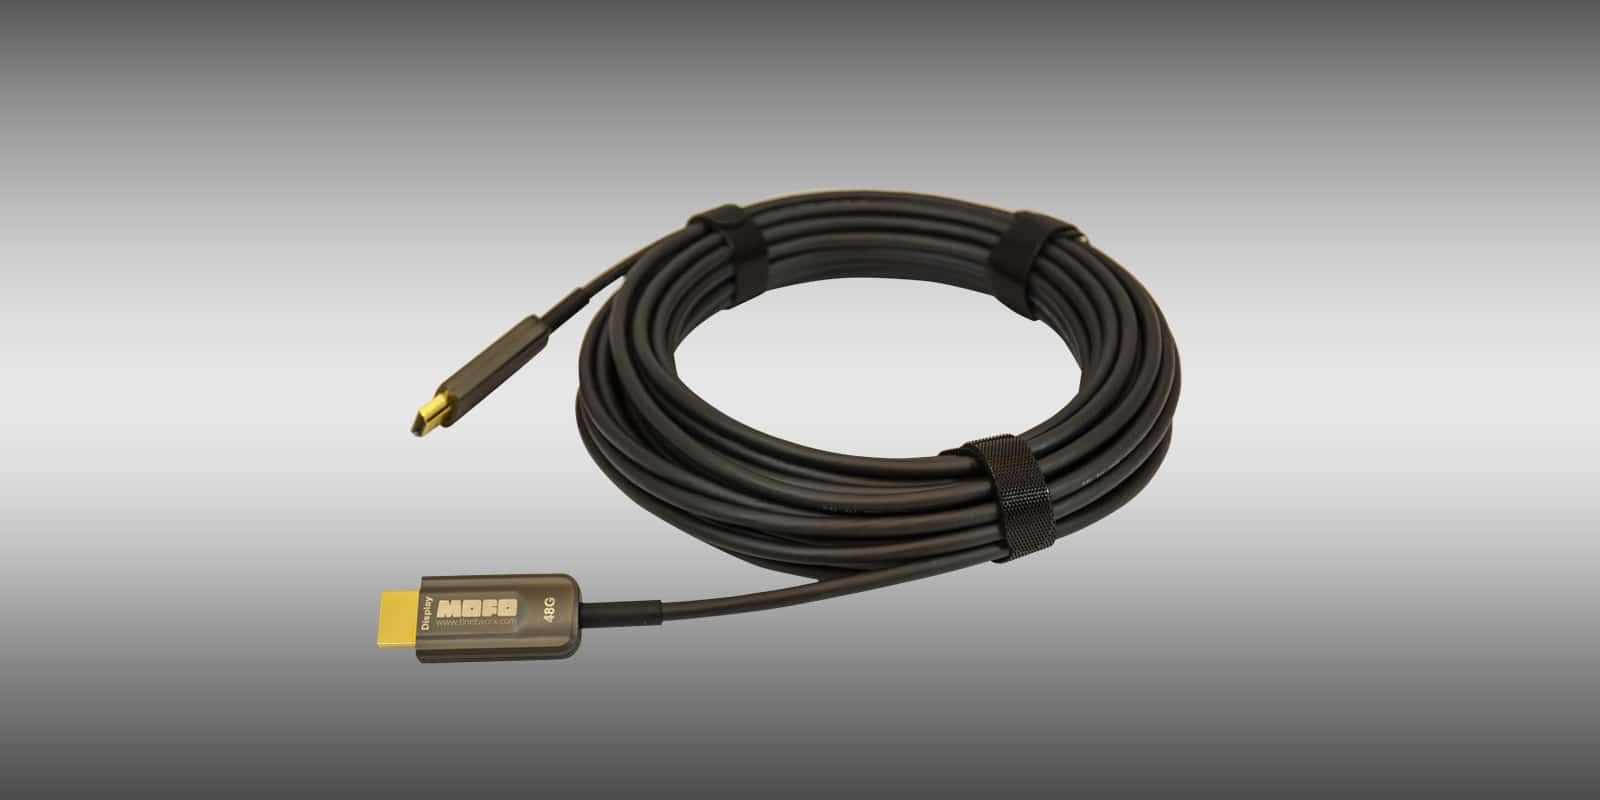 TechLogix Enables 8K Installations with New Fiber HDMI Cables